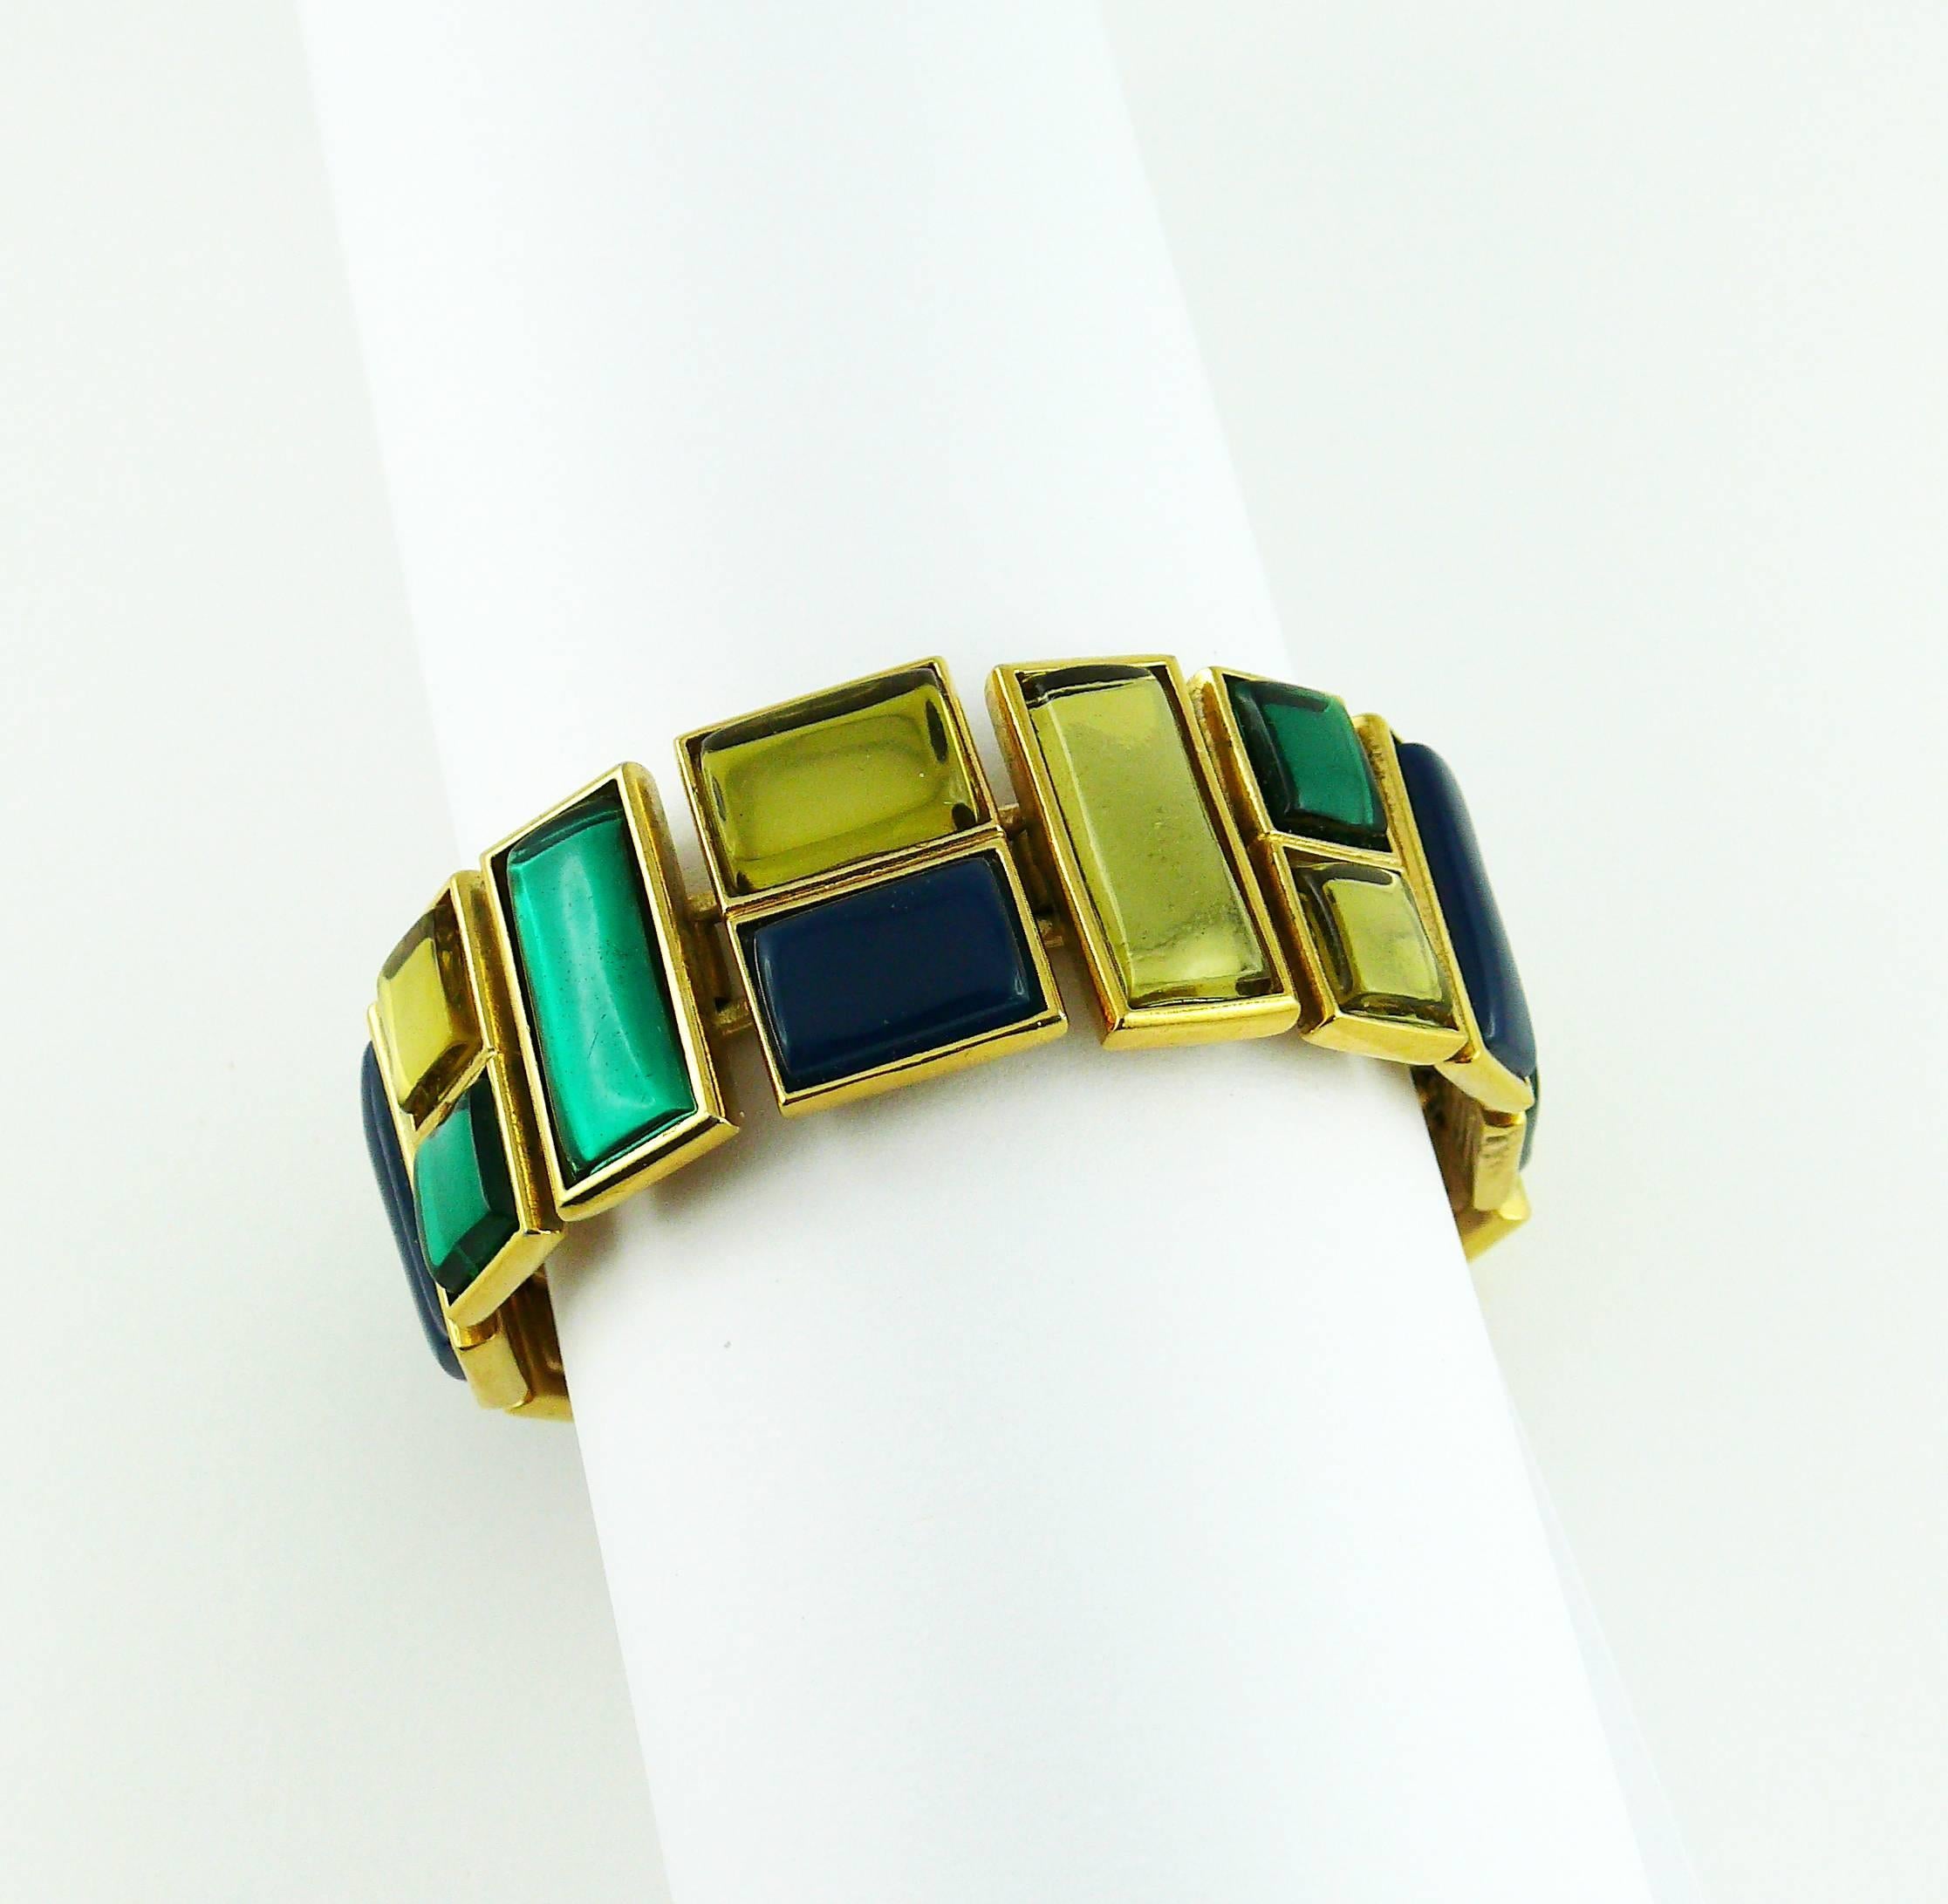 YVES SAINT LAURENT vintage Art Deco inspired geometric articulated bracelet featuring rectangular and square multi colored resin cabochons.

Embossed YSL Made in France.

Indicative measurements : length approx. 17.3 cm (6.81 inches) / width approx.